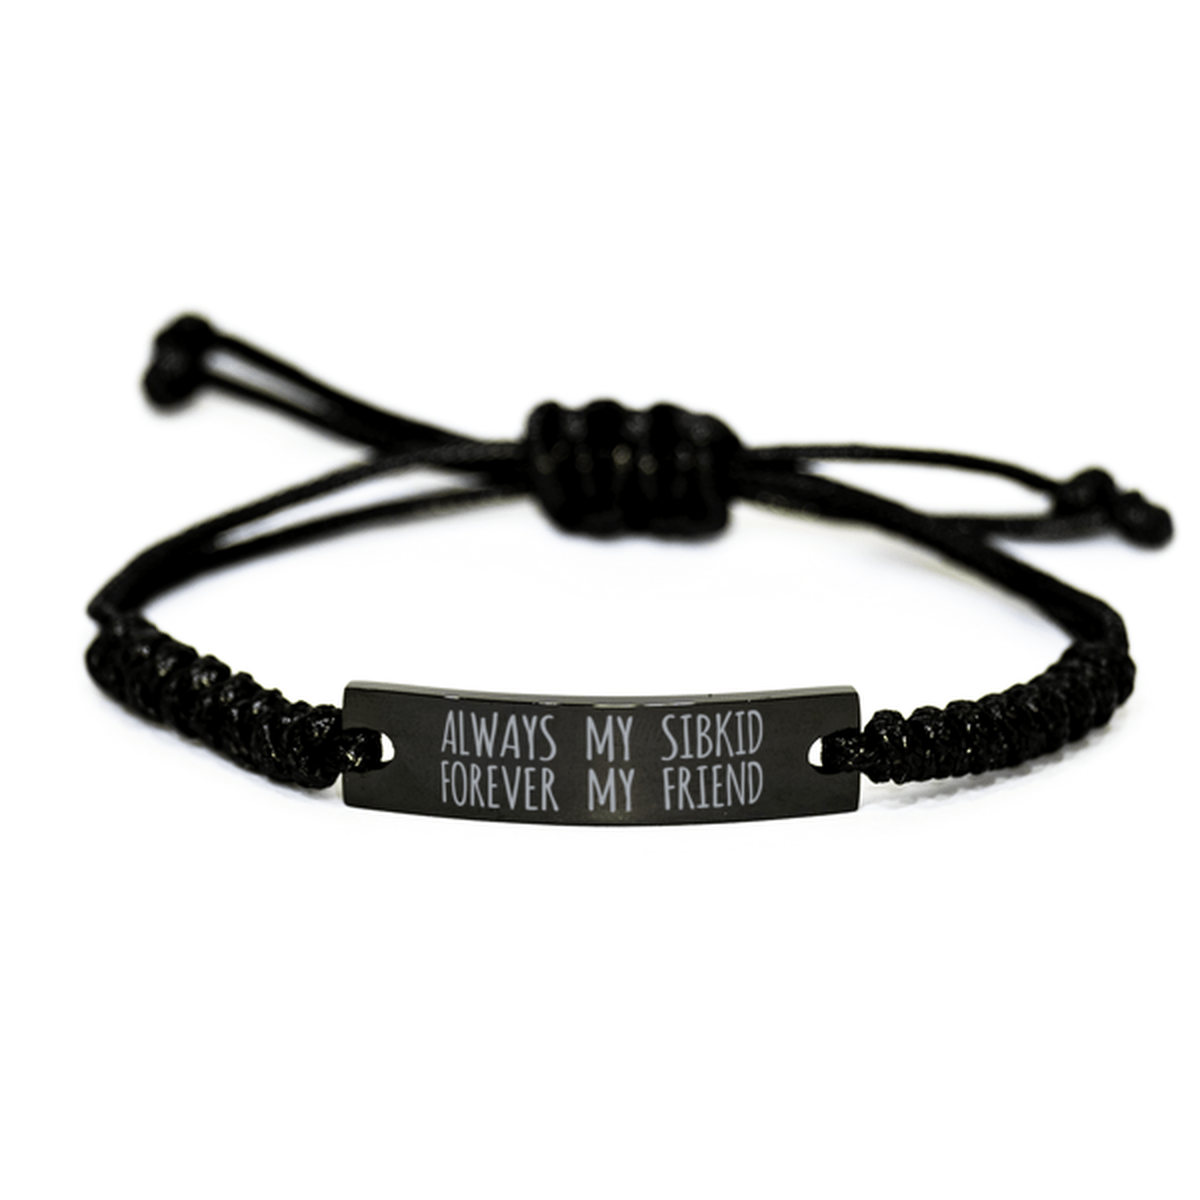 Inspirational Sibkid Black Rope Bracelet, Always My Sibkid Forever My Friend, Best Birthday Gifts For Family